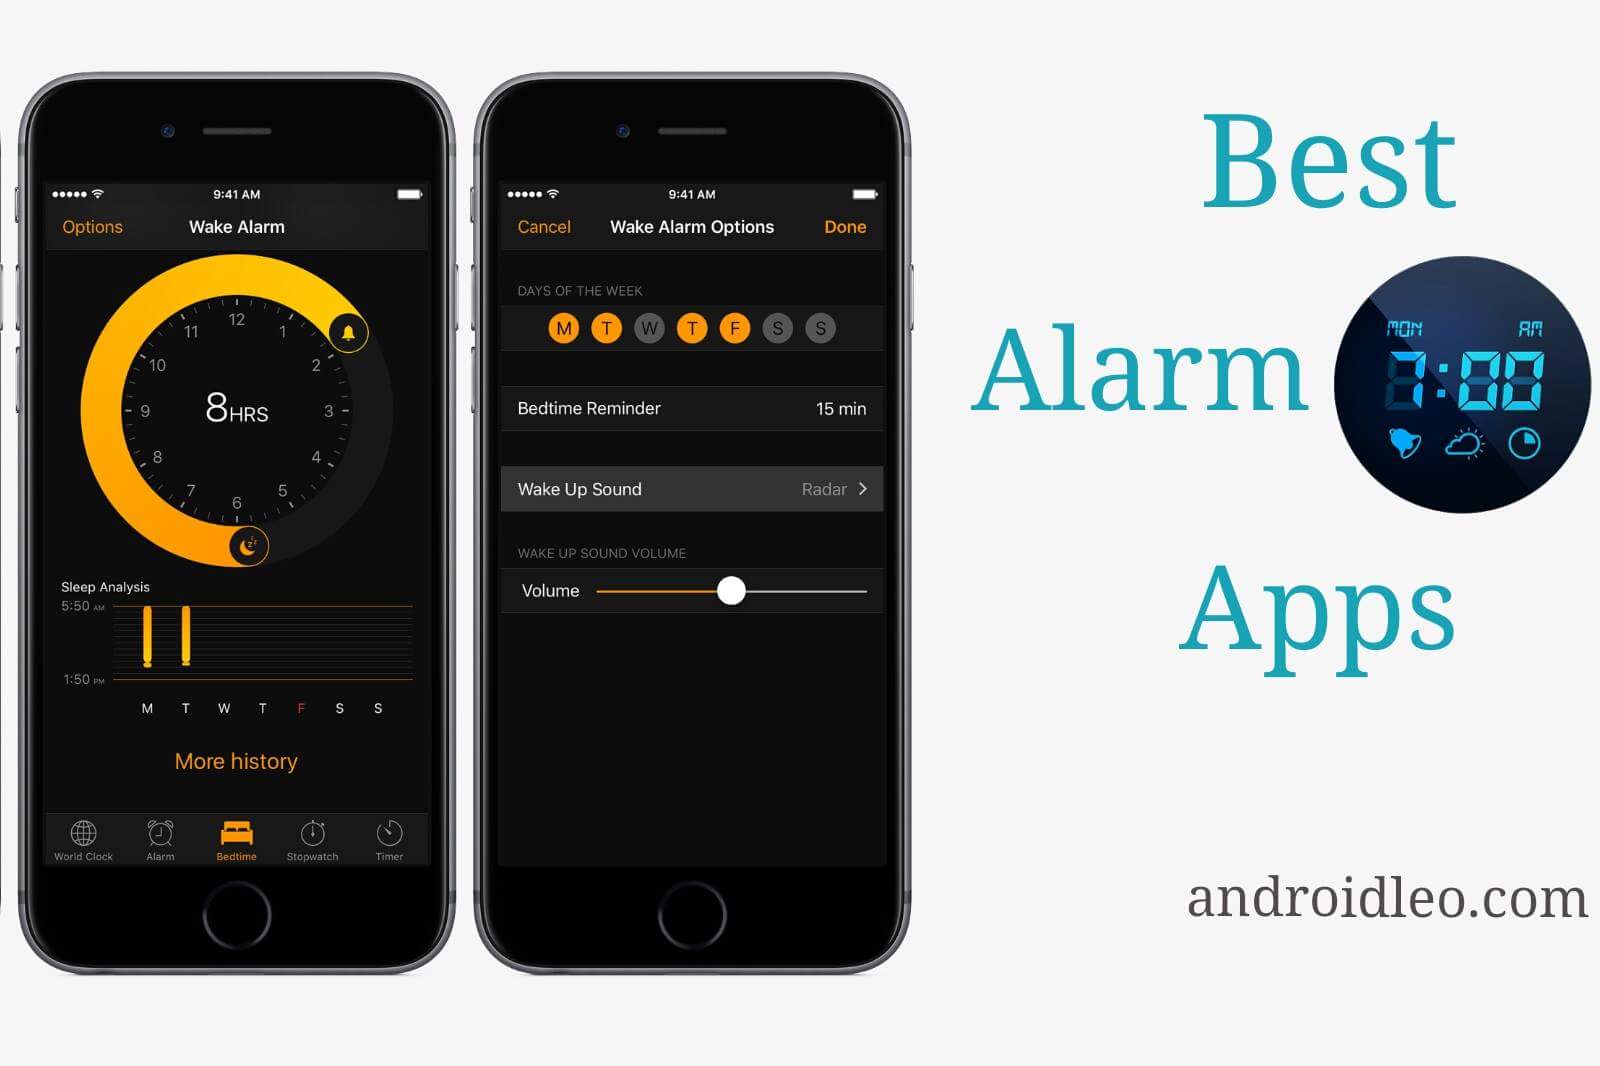 Best free alarm clock apps for Android smartphone 2018